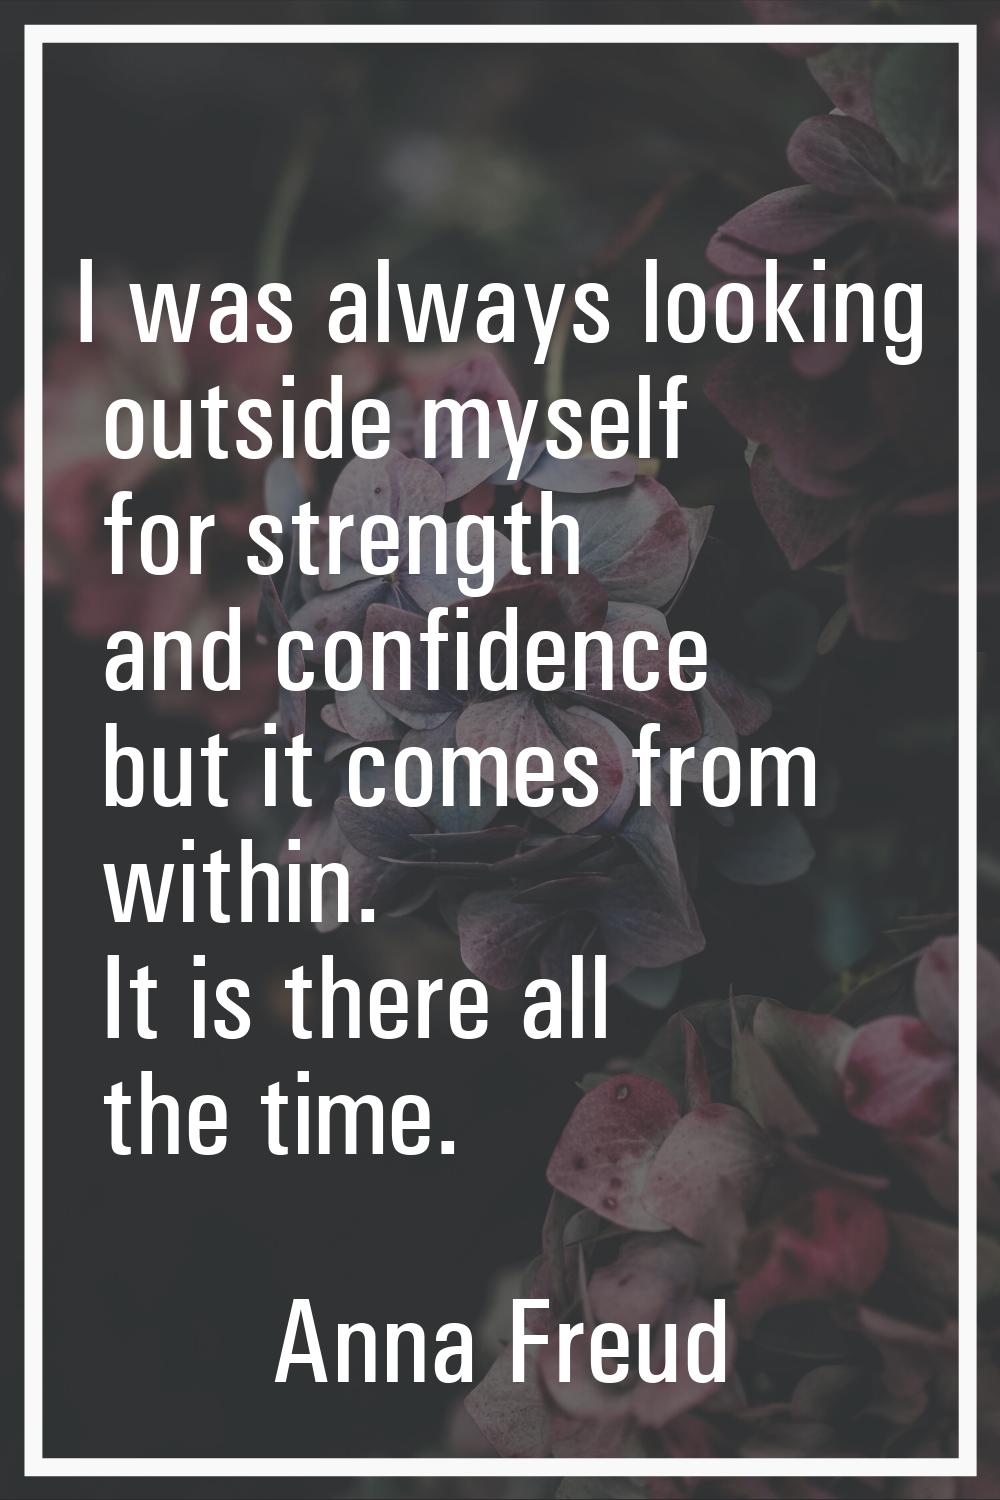 I was always looking outside myself for strength and confidence but it comes from within. It is the